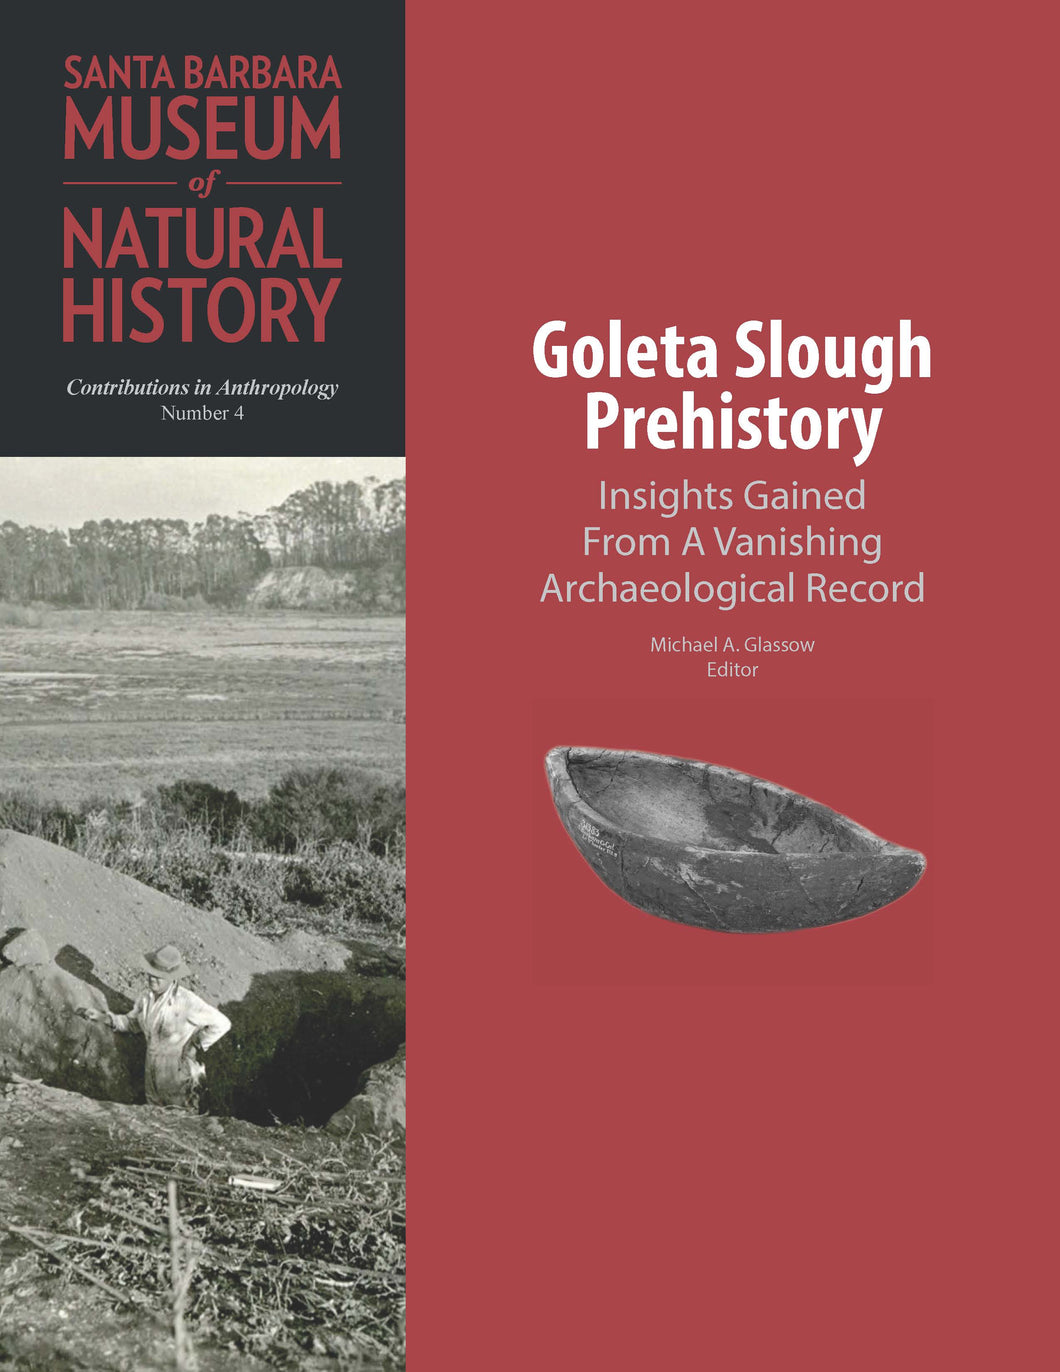 Goleta Slough Prehistory: Insights Gained From A Vanishing Archaeological Record